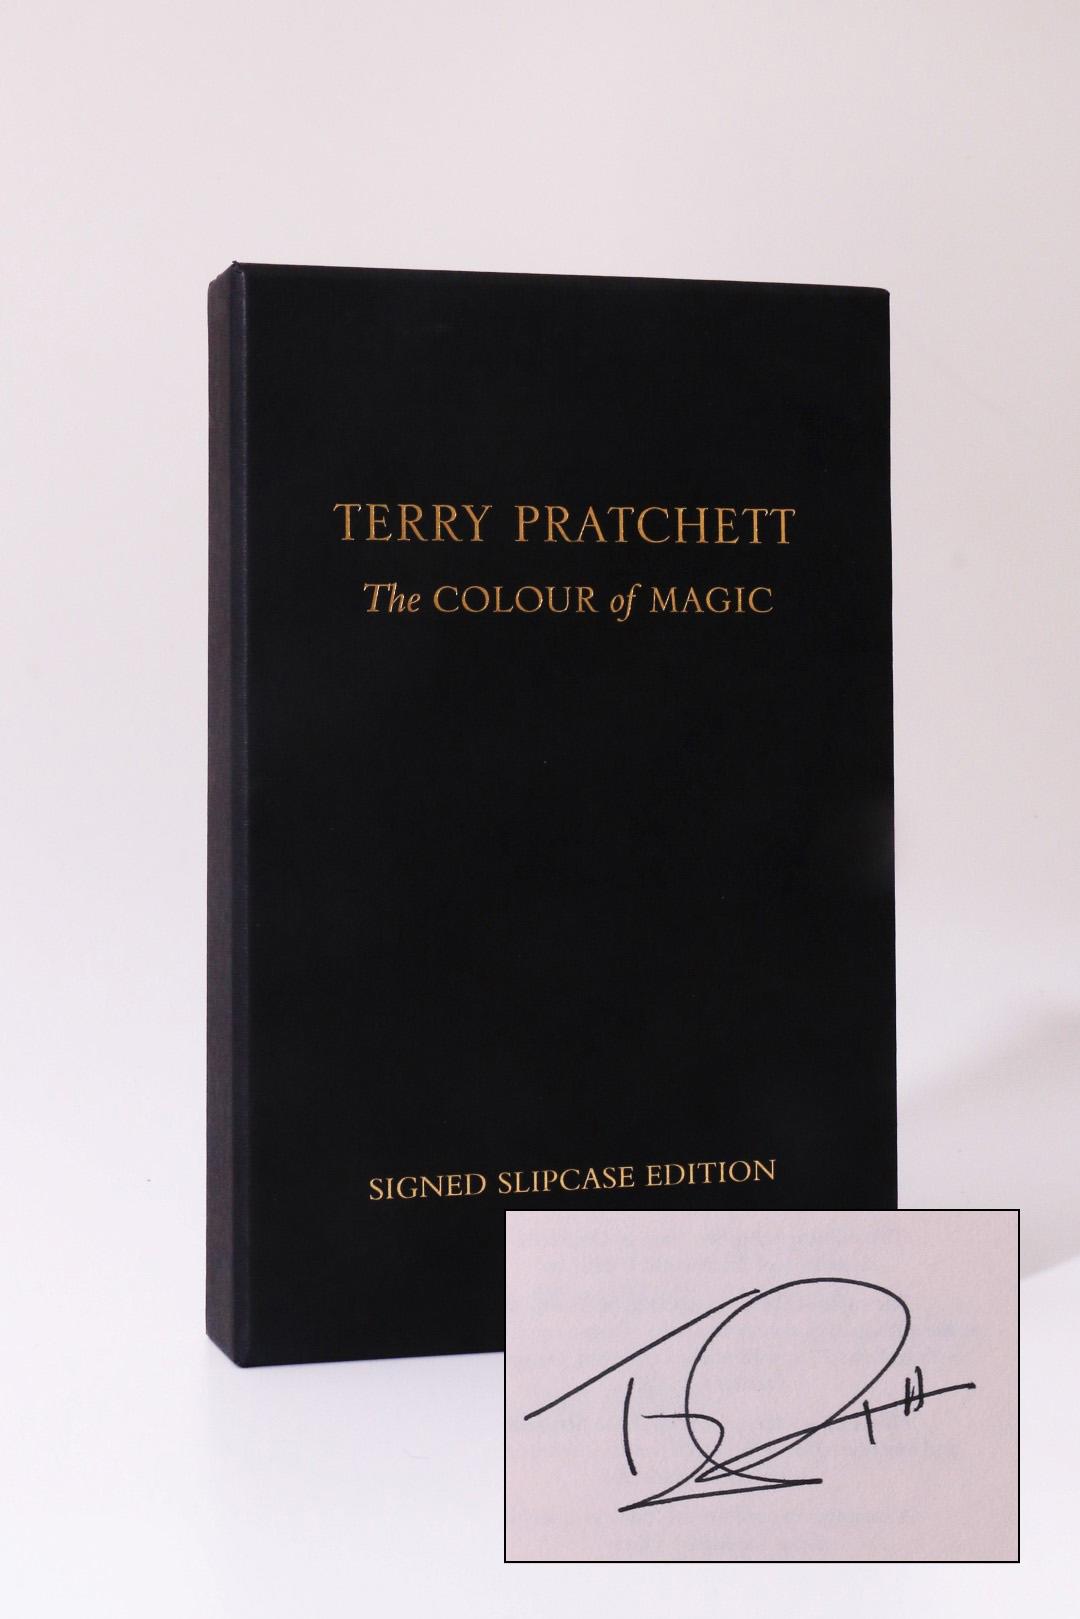 Terry Pratchett - The Colour of Magic - Doubleday, 2004, Signed Limited Edition.